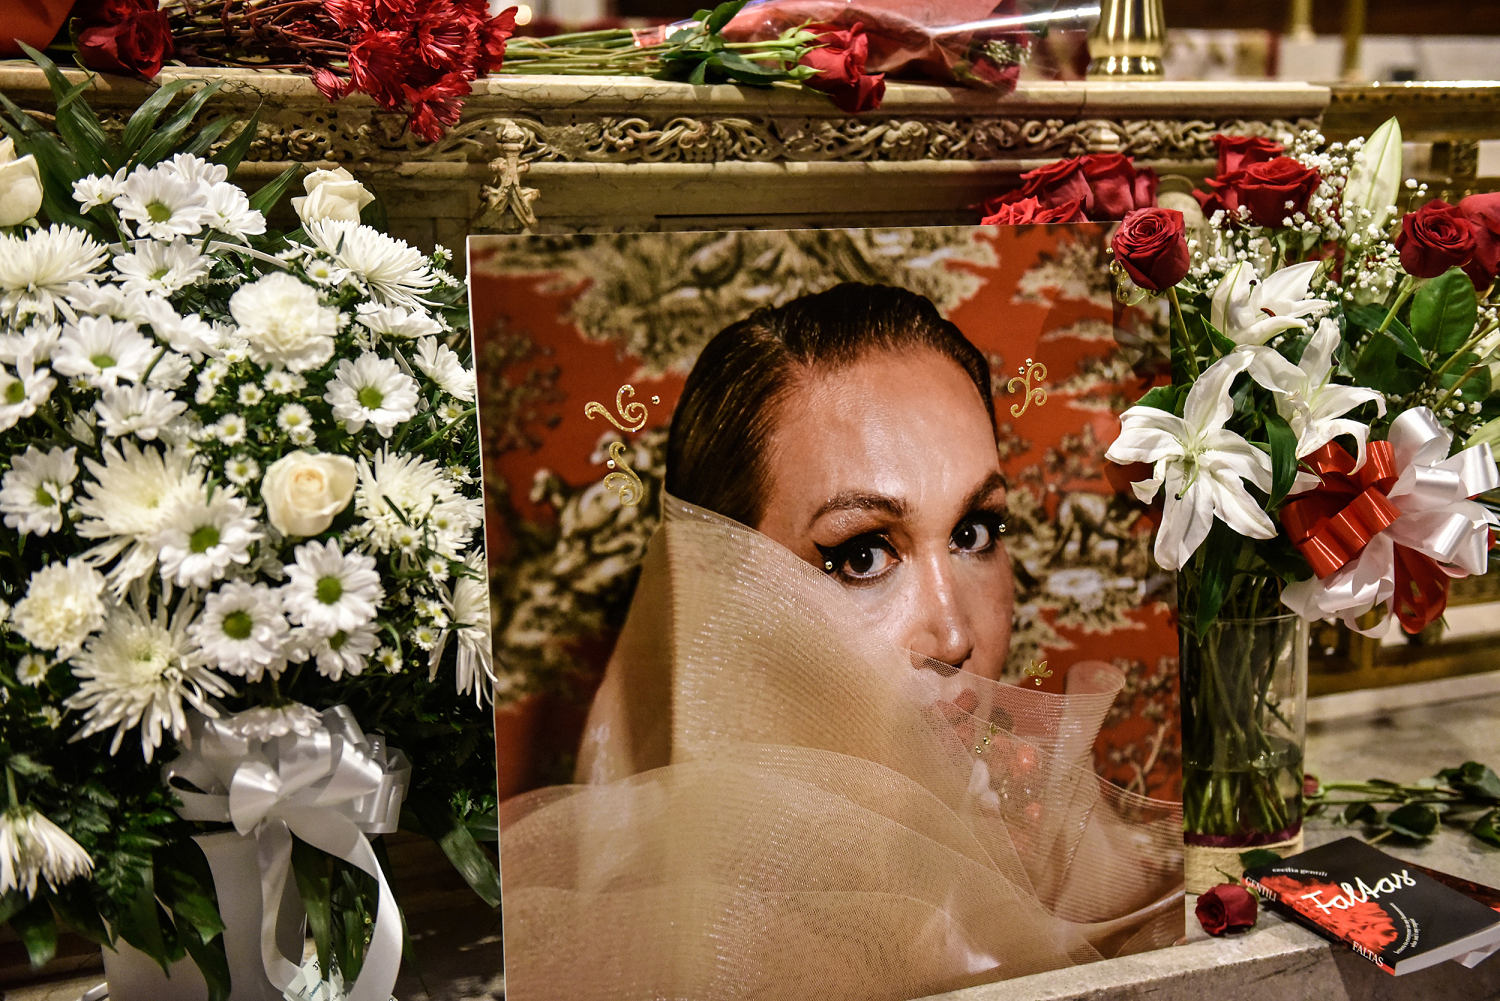 New York Archdiocese denounces funeral of trans activist and actor Cecilia Gentili